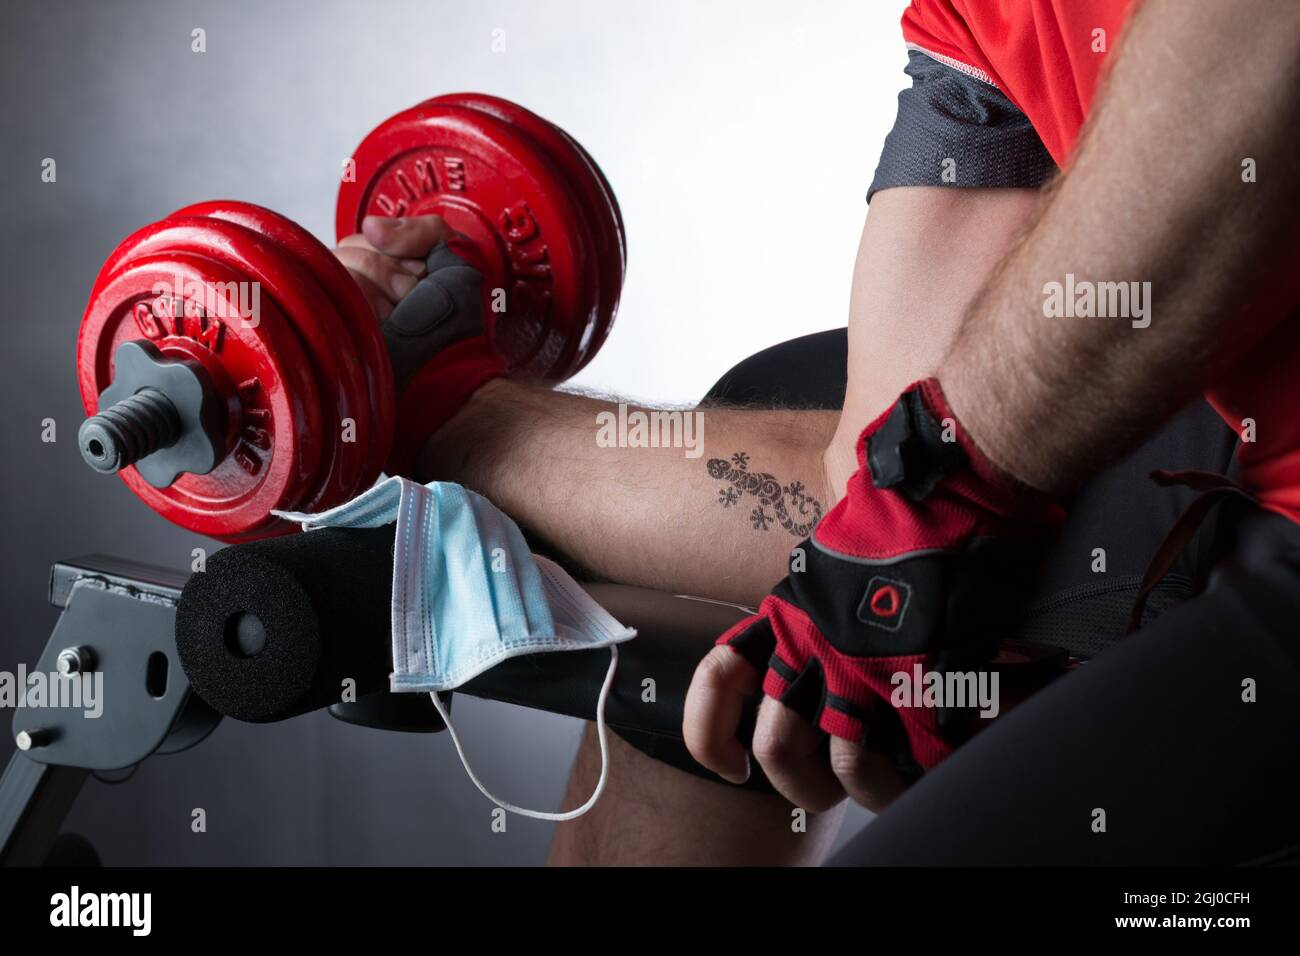 Man's arm with a lizard tattoo working out with a dumbbell during the pandemic Stock Photo